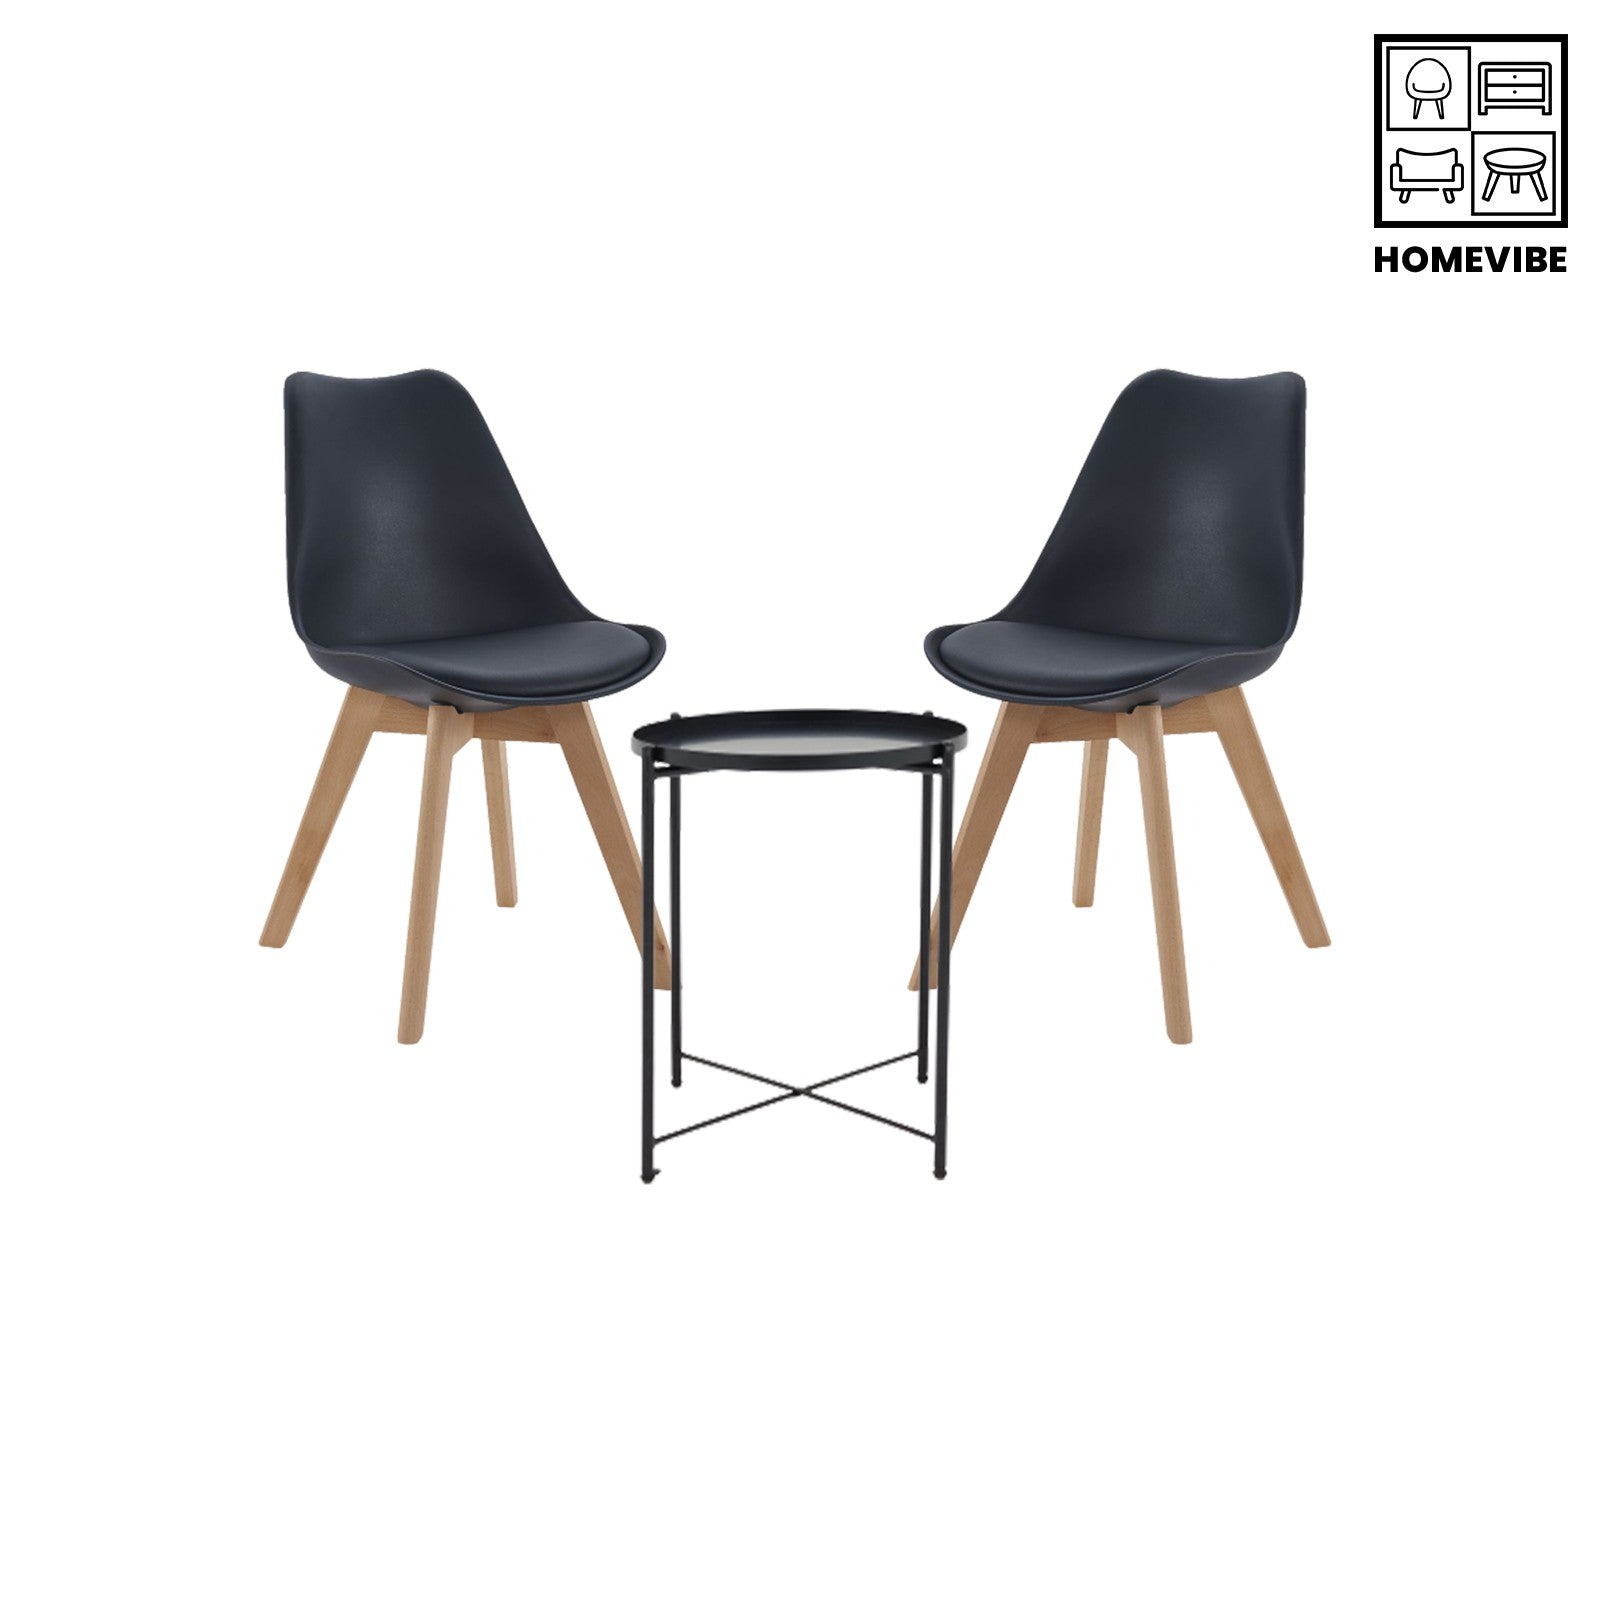 HV Cassie Steel Coffee Table + 2 Padded Chair Set | HomeVibe PH | Buy Online Furniture and Home Furnishings